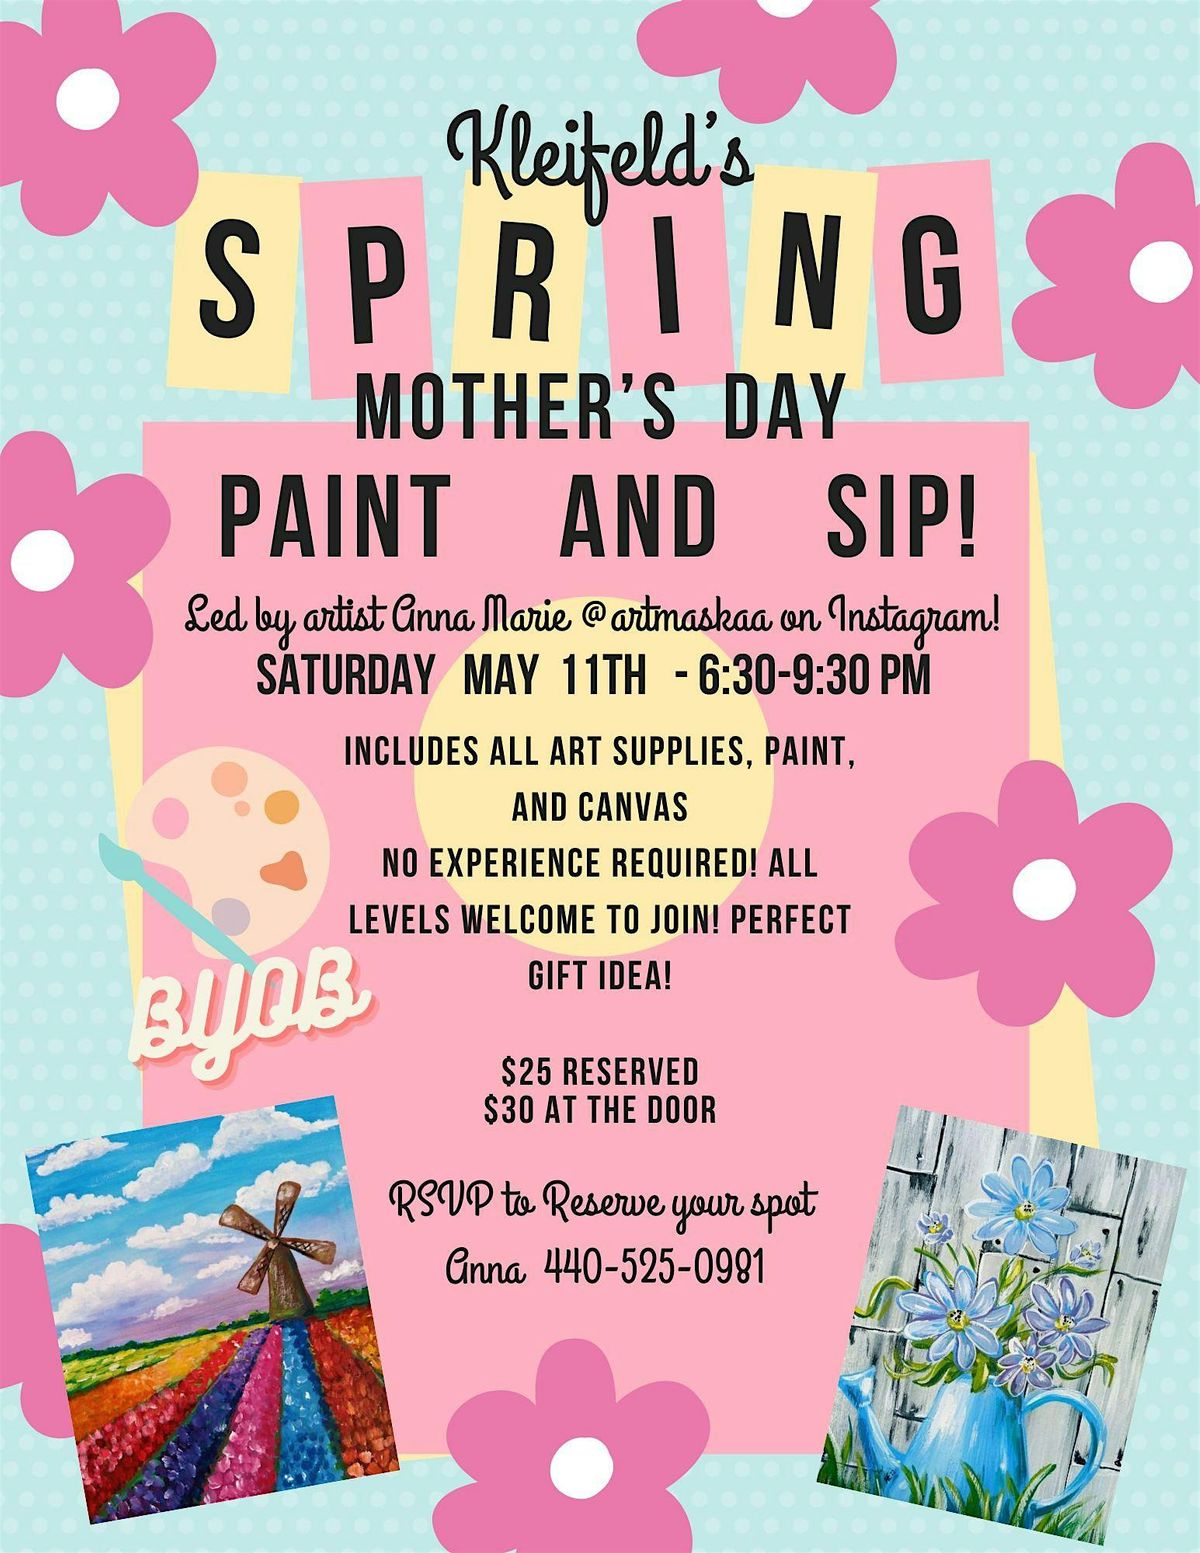 Kleifeld's Spring Mother's Day Paint and Sip!